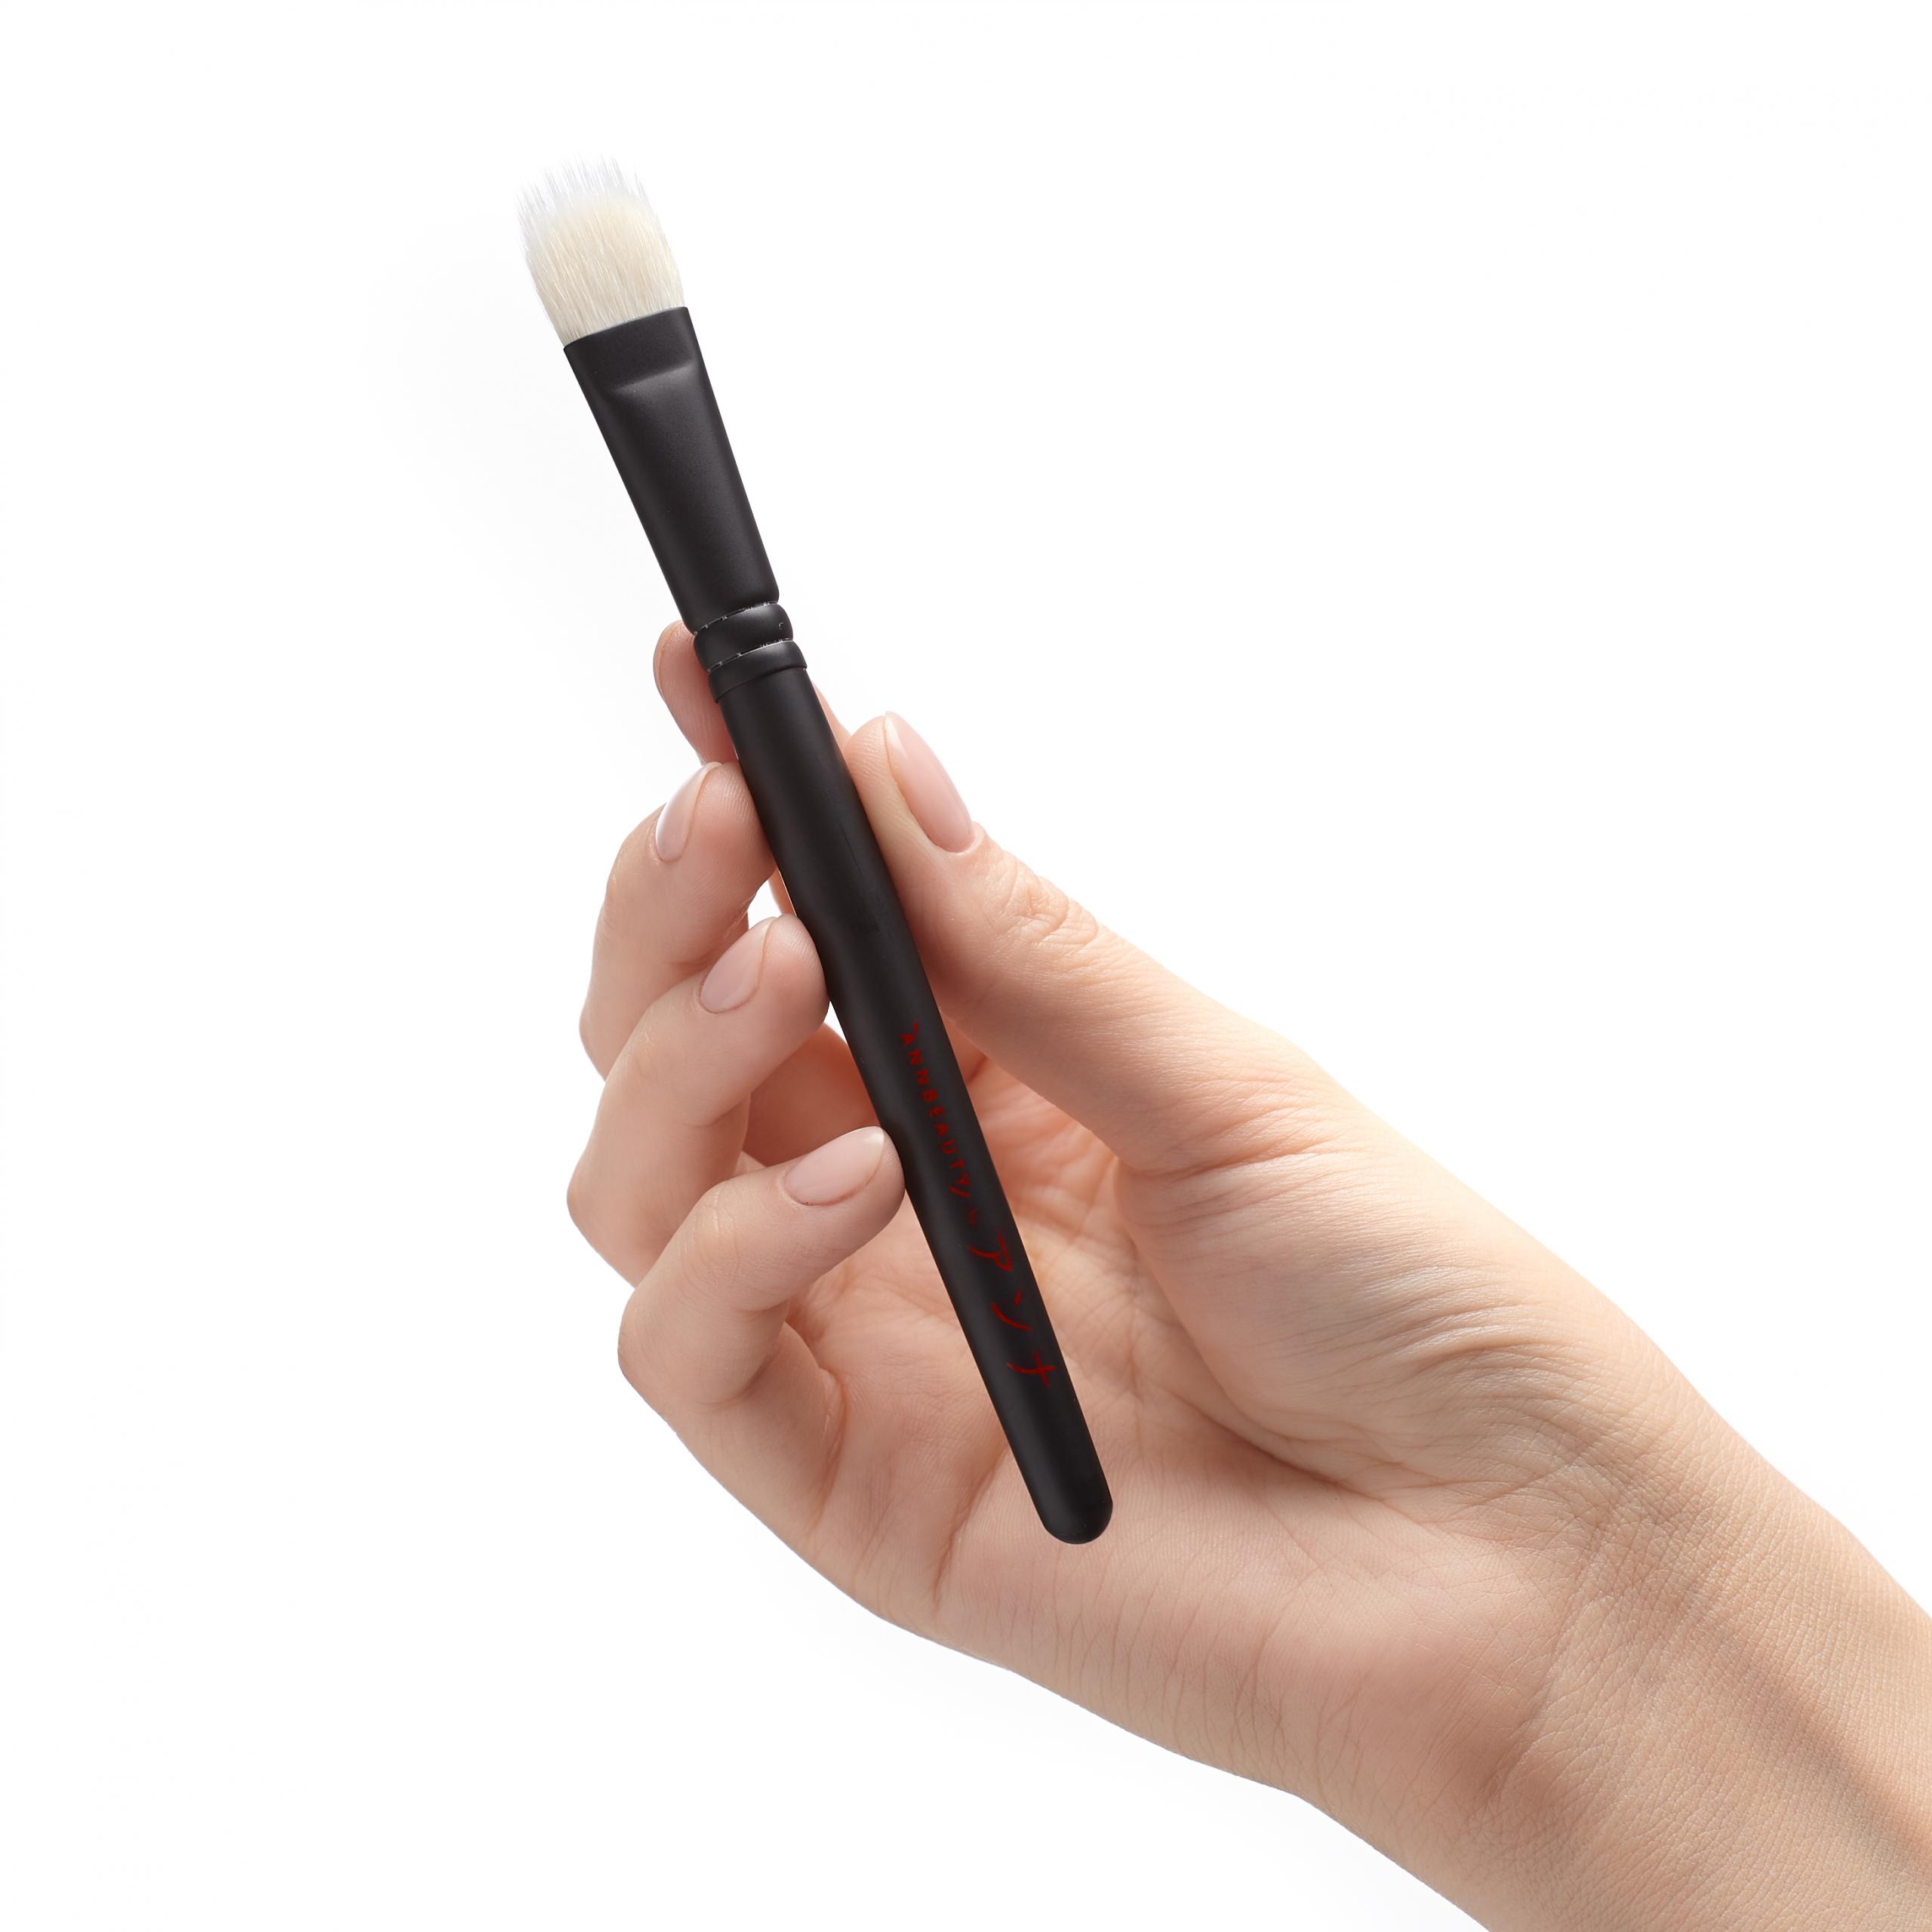 Annbeauty S20 Concealer Brush in hand